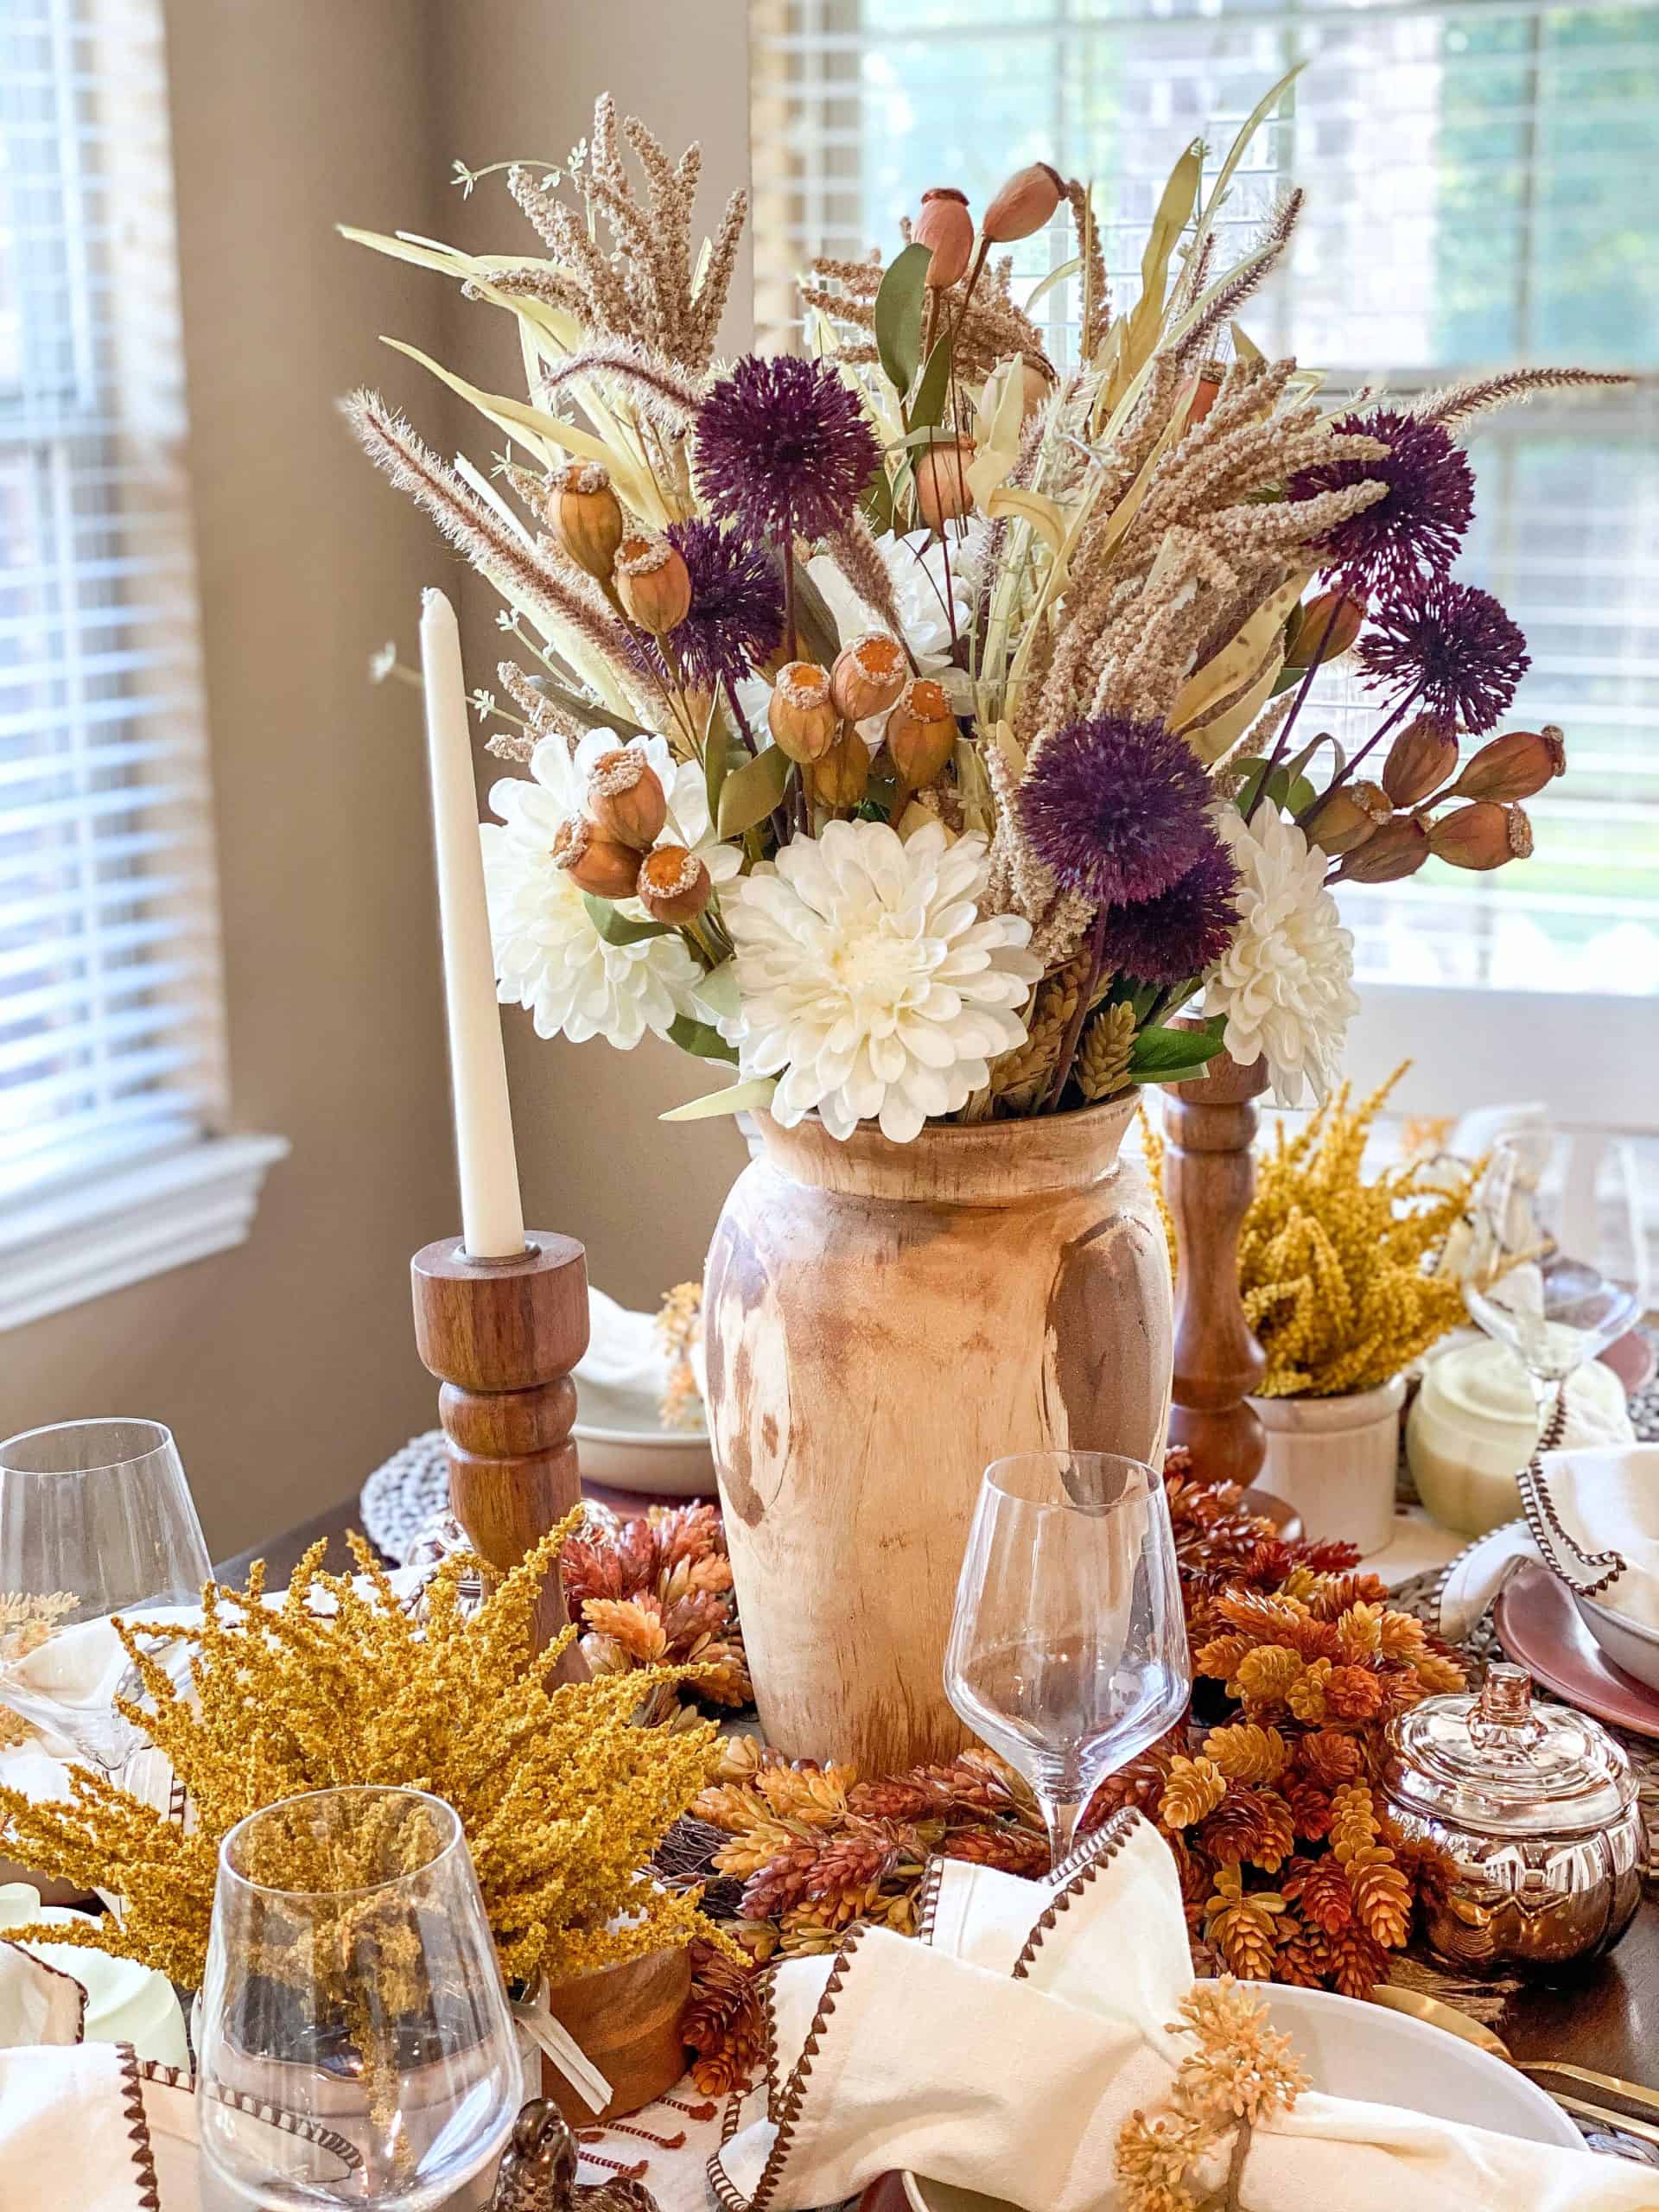 Fall Table Decor by popular Houston life and style blog, Glamorous Versatility: image of a dining table decorate with a Target table runner, straw place mats, linen napkins, wooden candle stick holders, white candle sticks, gold flatware, wooden vase, dried flowers, faux flowers, ceramic plates, ceramic bowls, and wine glasses. 